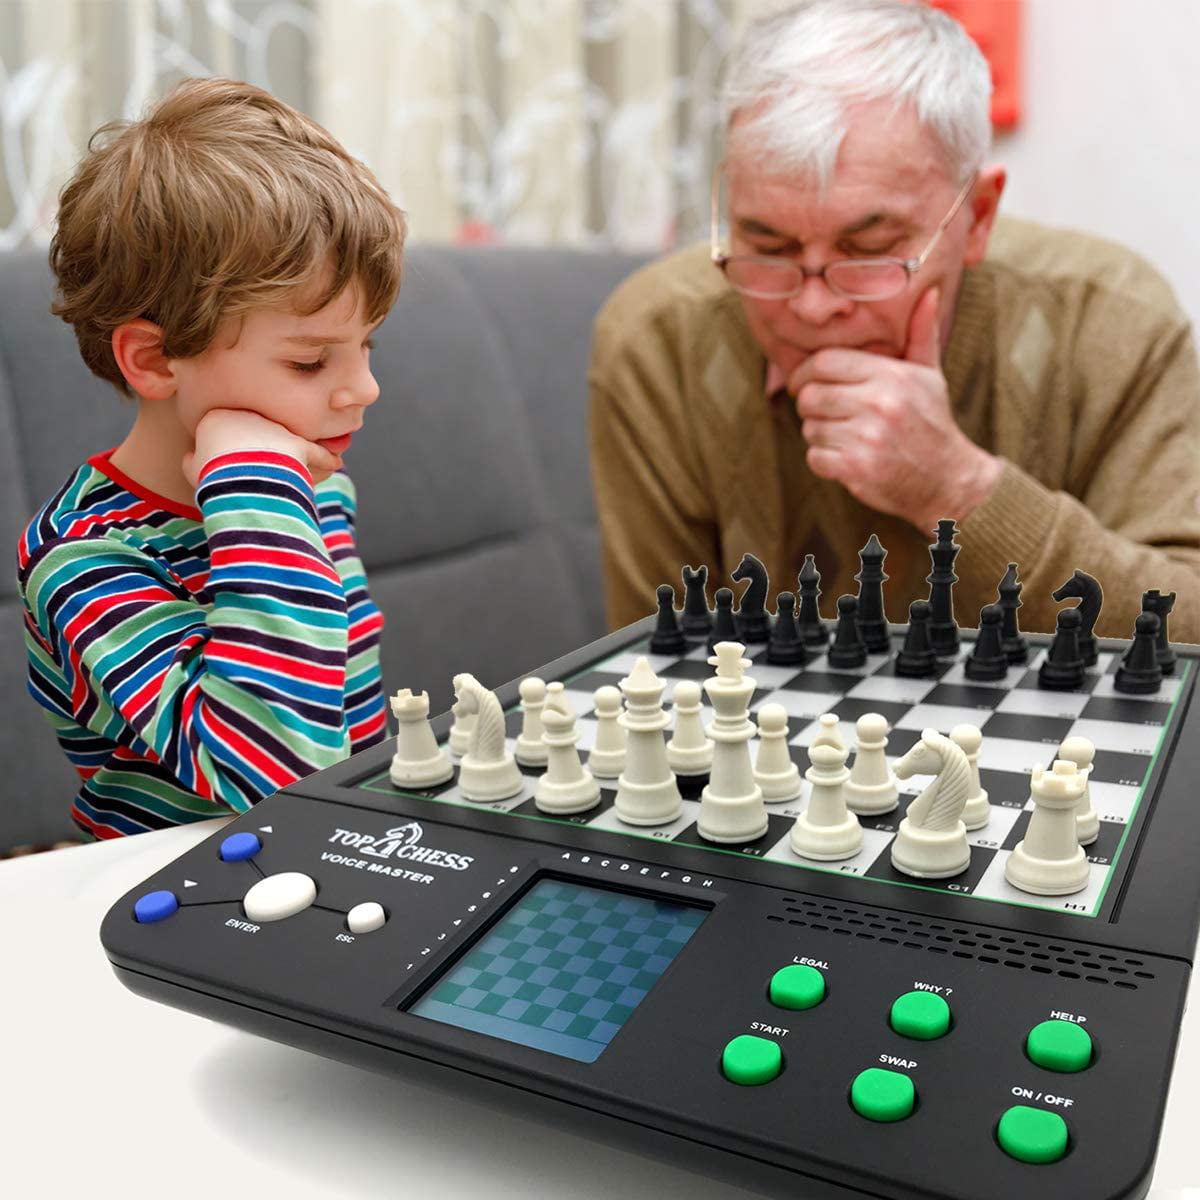 Beginners chess computer electronic Chess Board Game With Learning Chess  Board and Cards, For Kids to Learn an Play - AliExpress